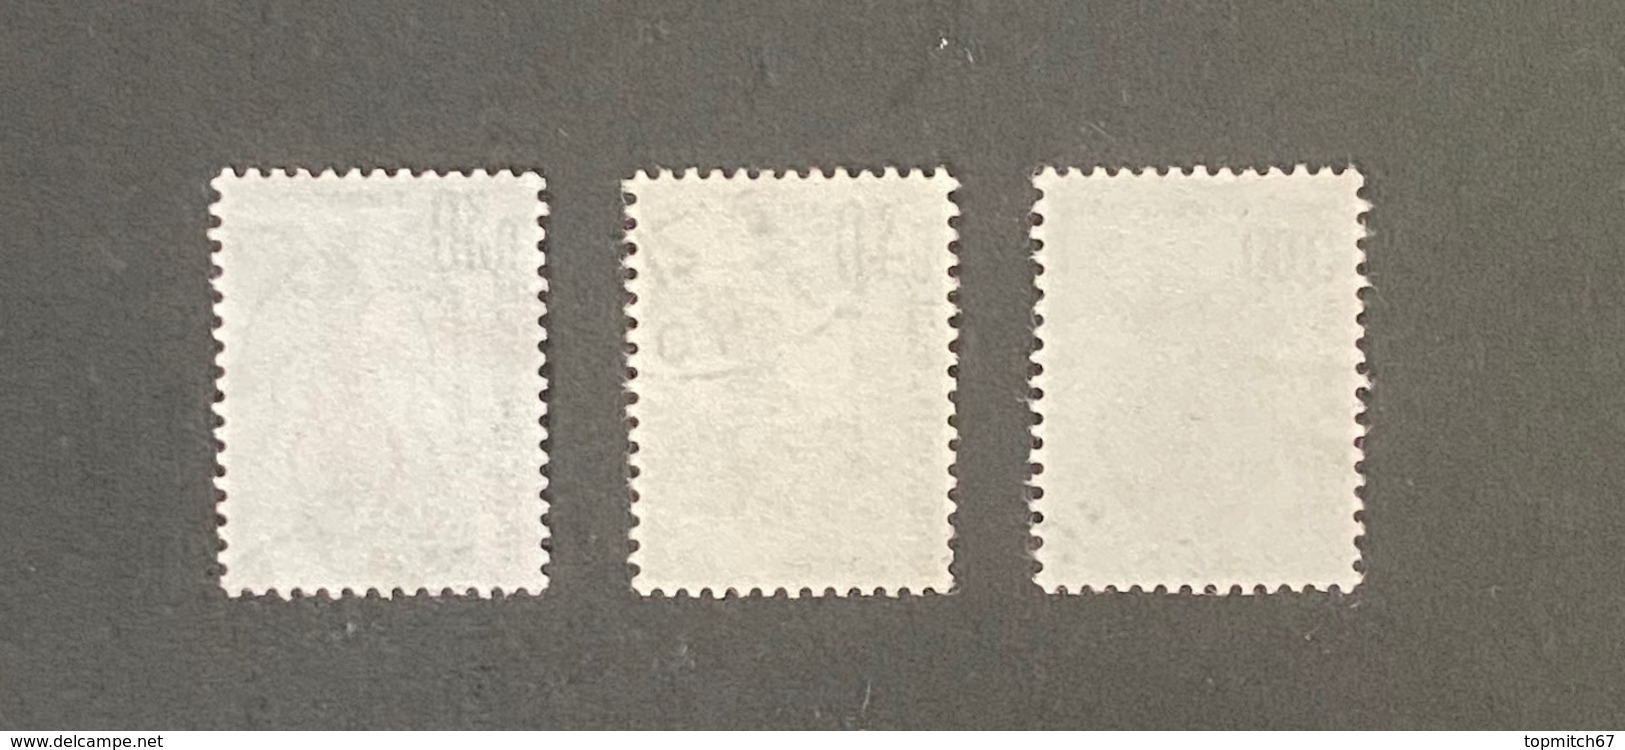 FRAYX109-11U - Timbres Taxe Insectes Coléoptères (I) Set Of 3 Used Stamps 1983 - France YT YX 109-11 - Stamps